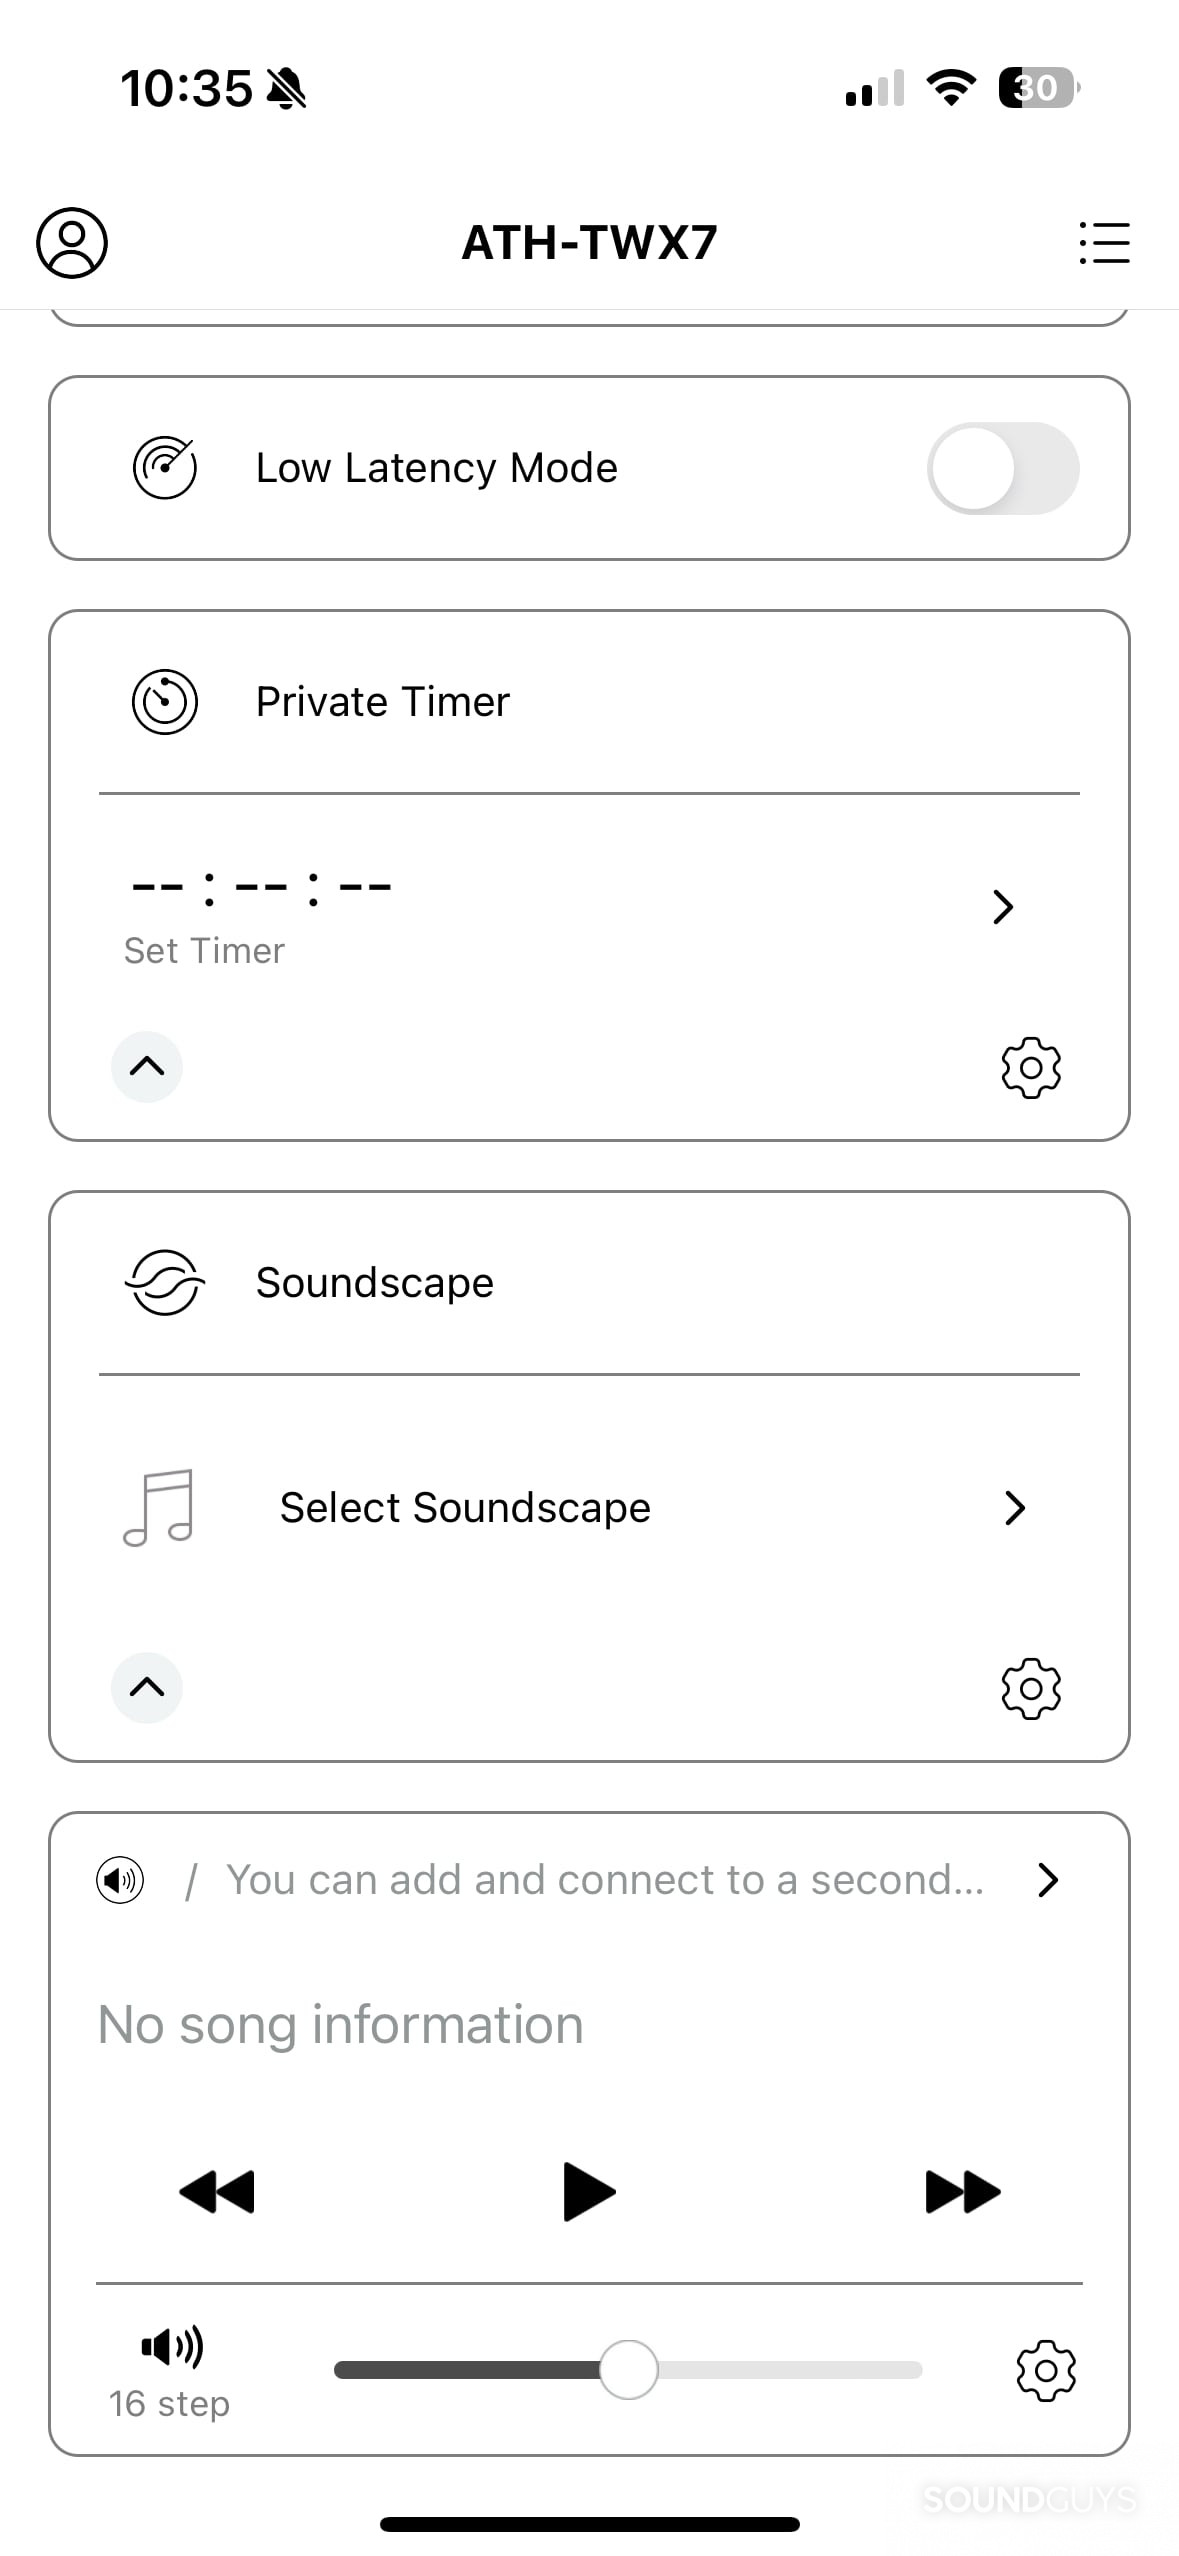 Audio-Technica ATH-TWX7 A-T Connect app music playback.